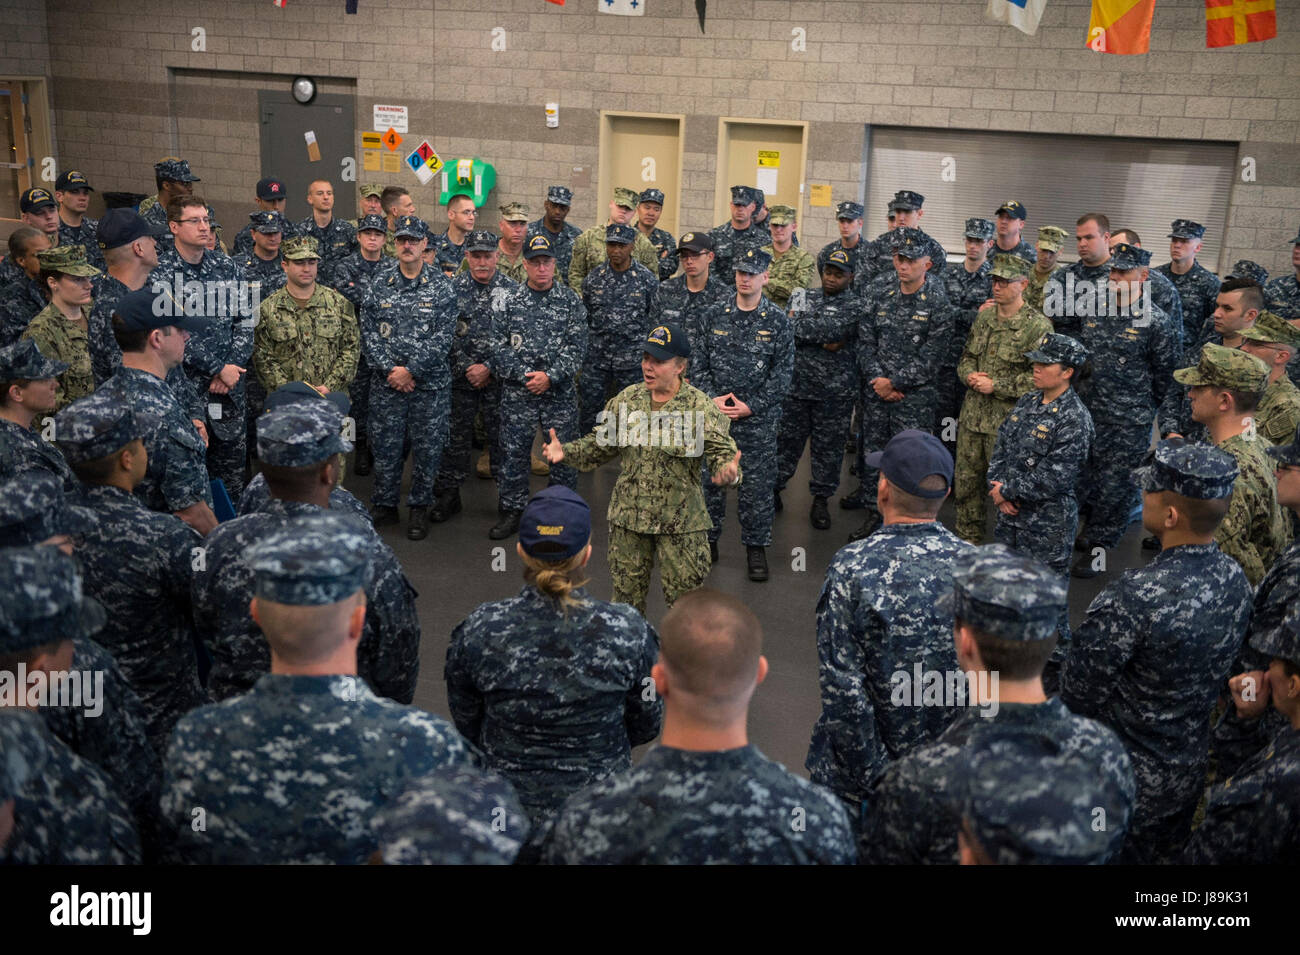 170520-N-QP351-079 INDIANAPOLIS (May 20, 2017) Rear Admiral Linda Wackerman, Deputy Commander, U.S. Naval Forces Southern Command, 4th Fleet, visits with Sailors from Navy Operational Support Center Indianapolis during an Admirals Call. Wackerman who also serves as the flag mentor for NOSC Indianapolis, held an all-hands Q&A session for E-6 and below Sailors to address upcoming changes and get feedback regarding Navy-related issues they feel need to be improved. (U.S. Navy photo by Mass Communication Specialist 2nd Class (SW/EXW/AW/SC) J. Michael Schwartz) Stock Photo